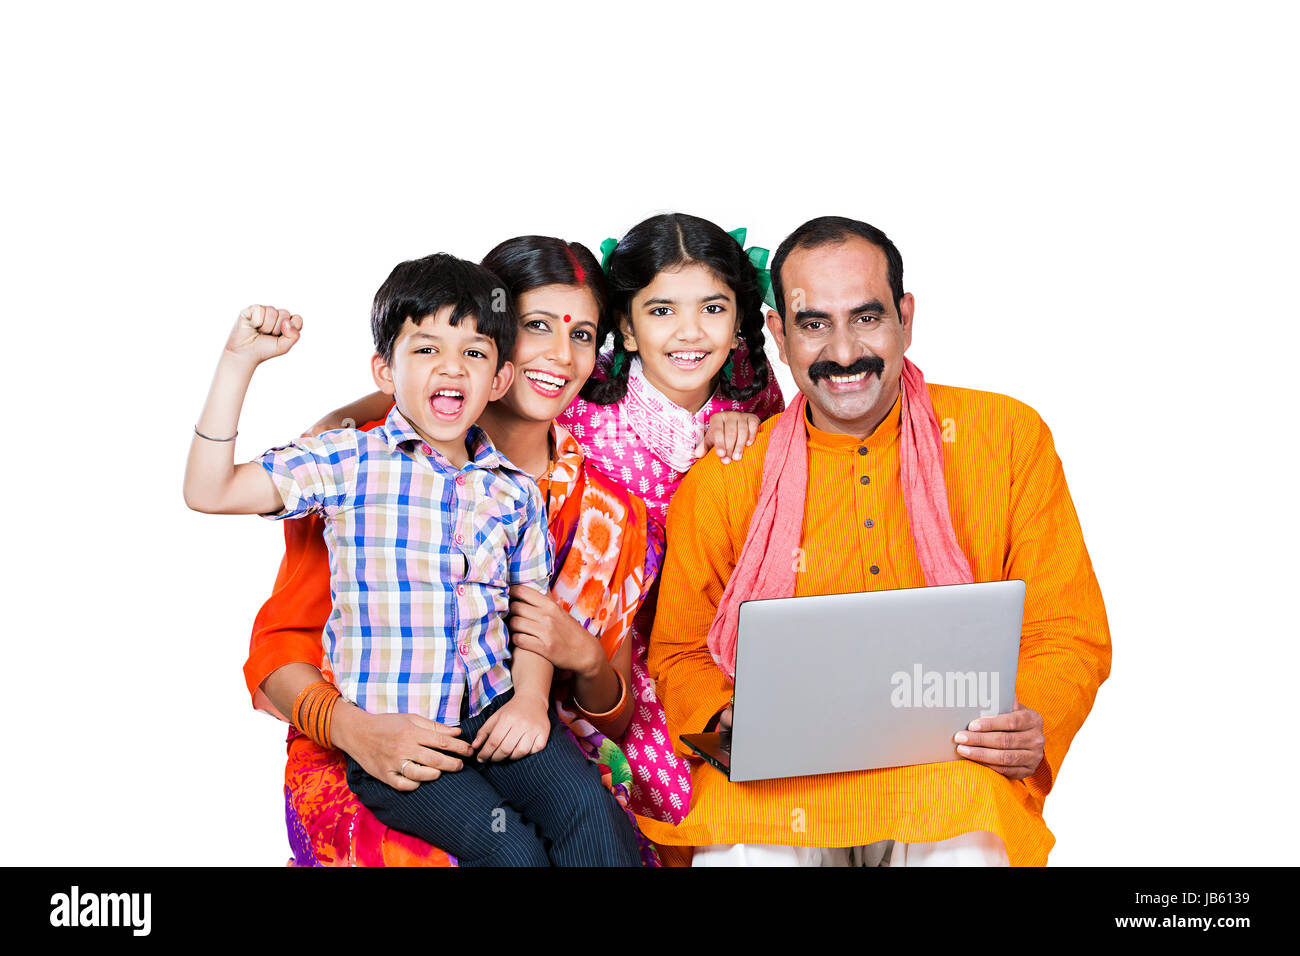 Happy Indian Rural Parents And 2 Children Sitting Together And Using Laptop Successful Education Learn Stock Photo